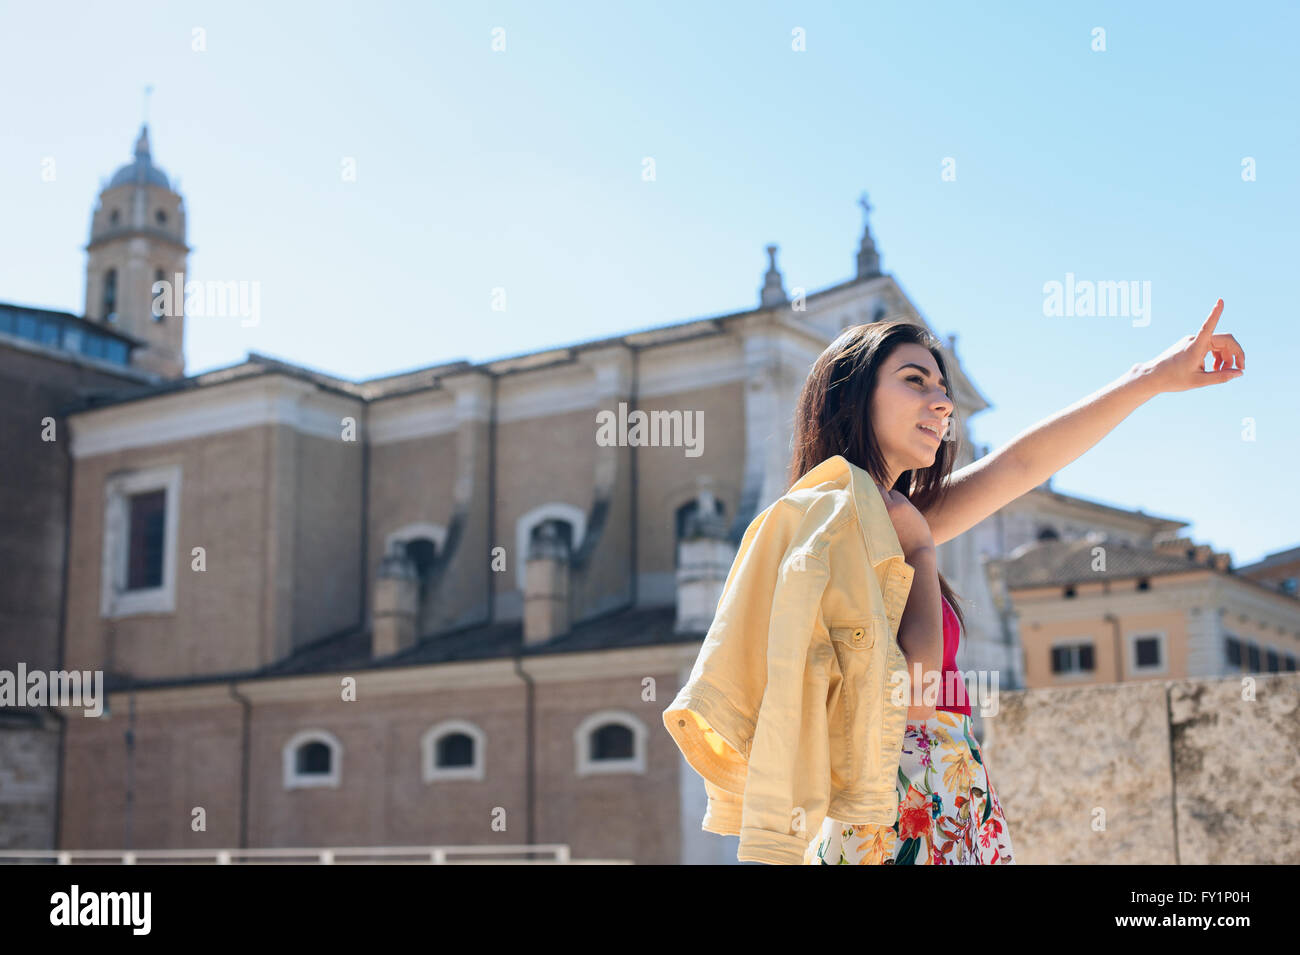 Young woman tourist summer pointing out outdoor with old churches in background Stock Photo